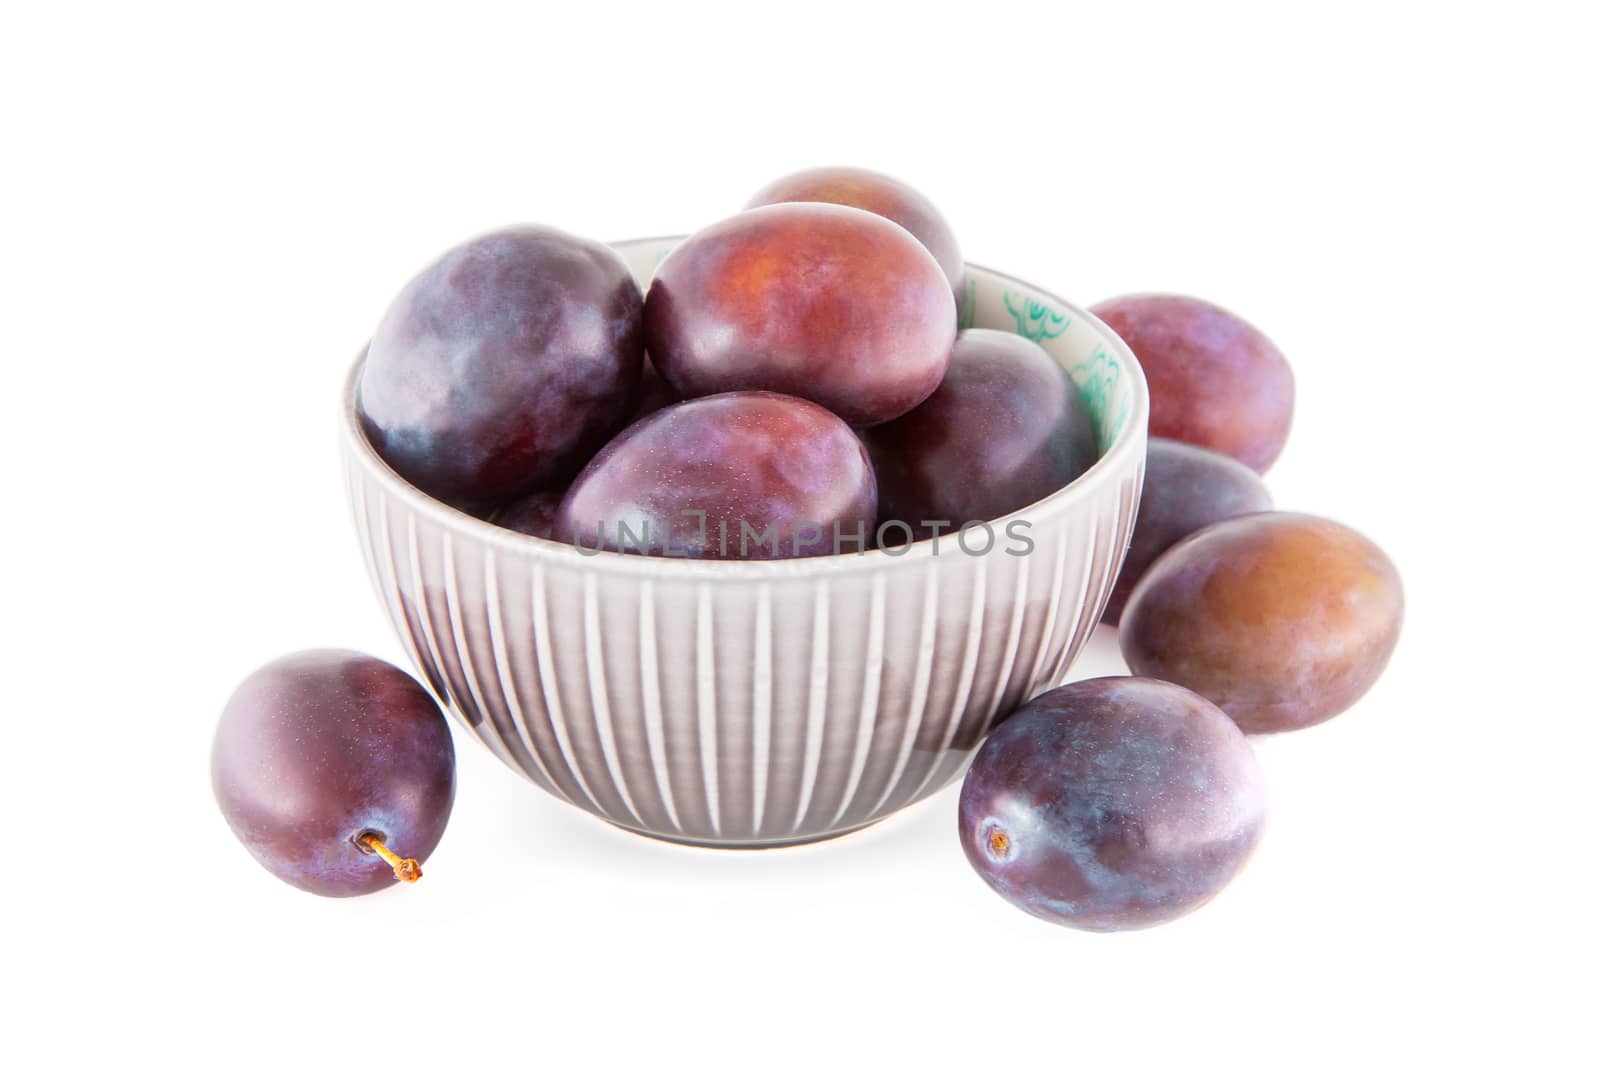 Fruits plums ina bowl isolated by Gbuglok